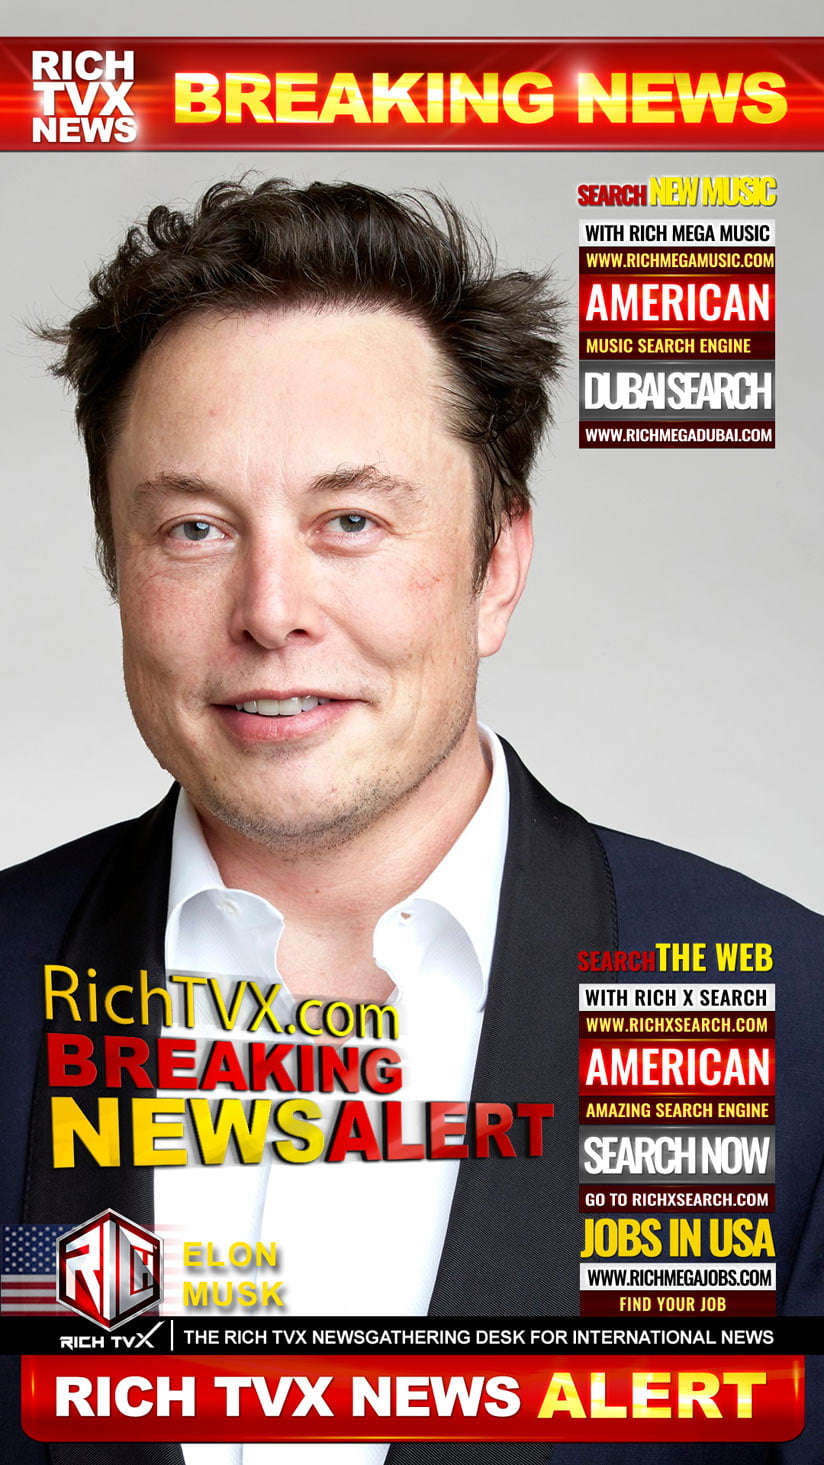 Elon Musk avenges the Rich TVX News Network and fires top Twitter executives